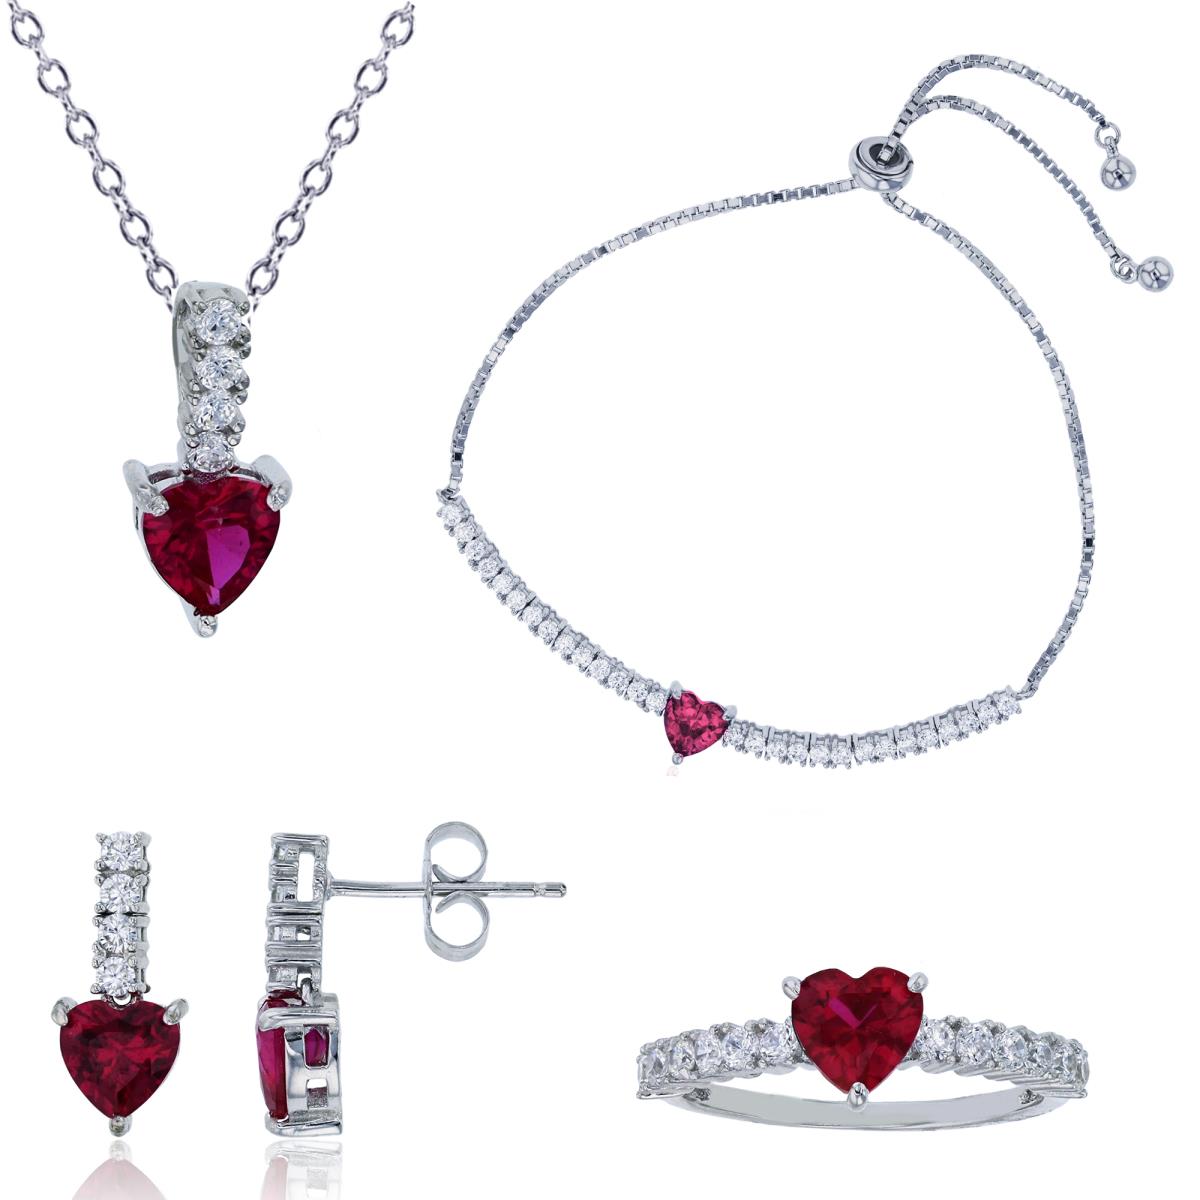 Sterling Silver Rhodium 6mm Red Ruby Heart Cut Jewelry Set (Bracelet, Earring, Ring and 18" Necklace)